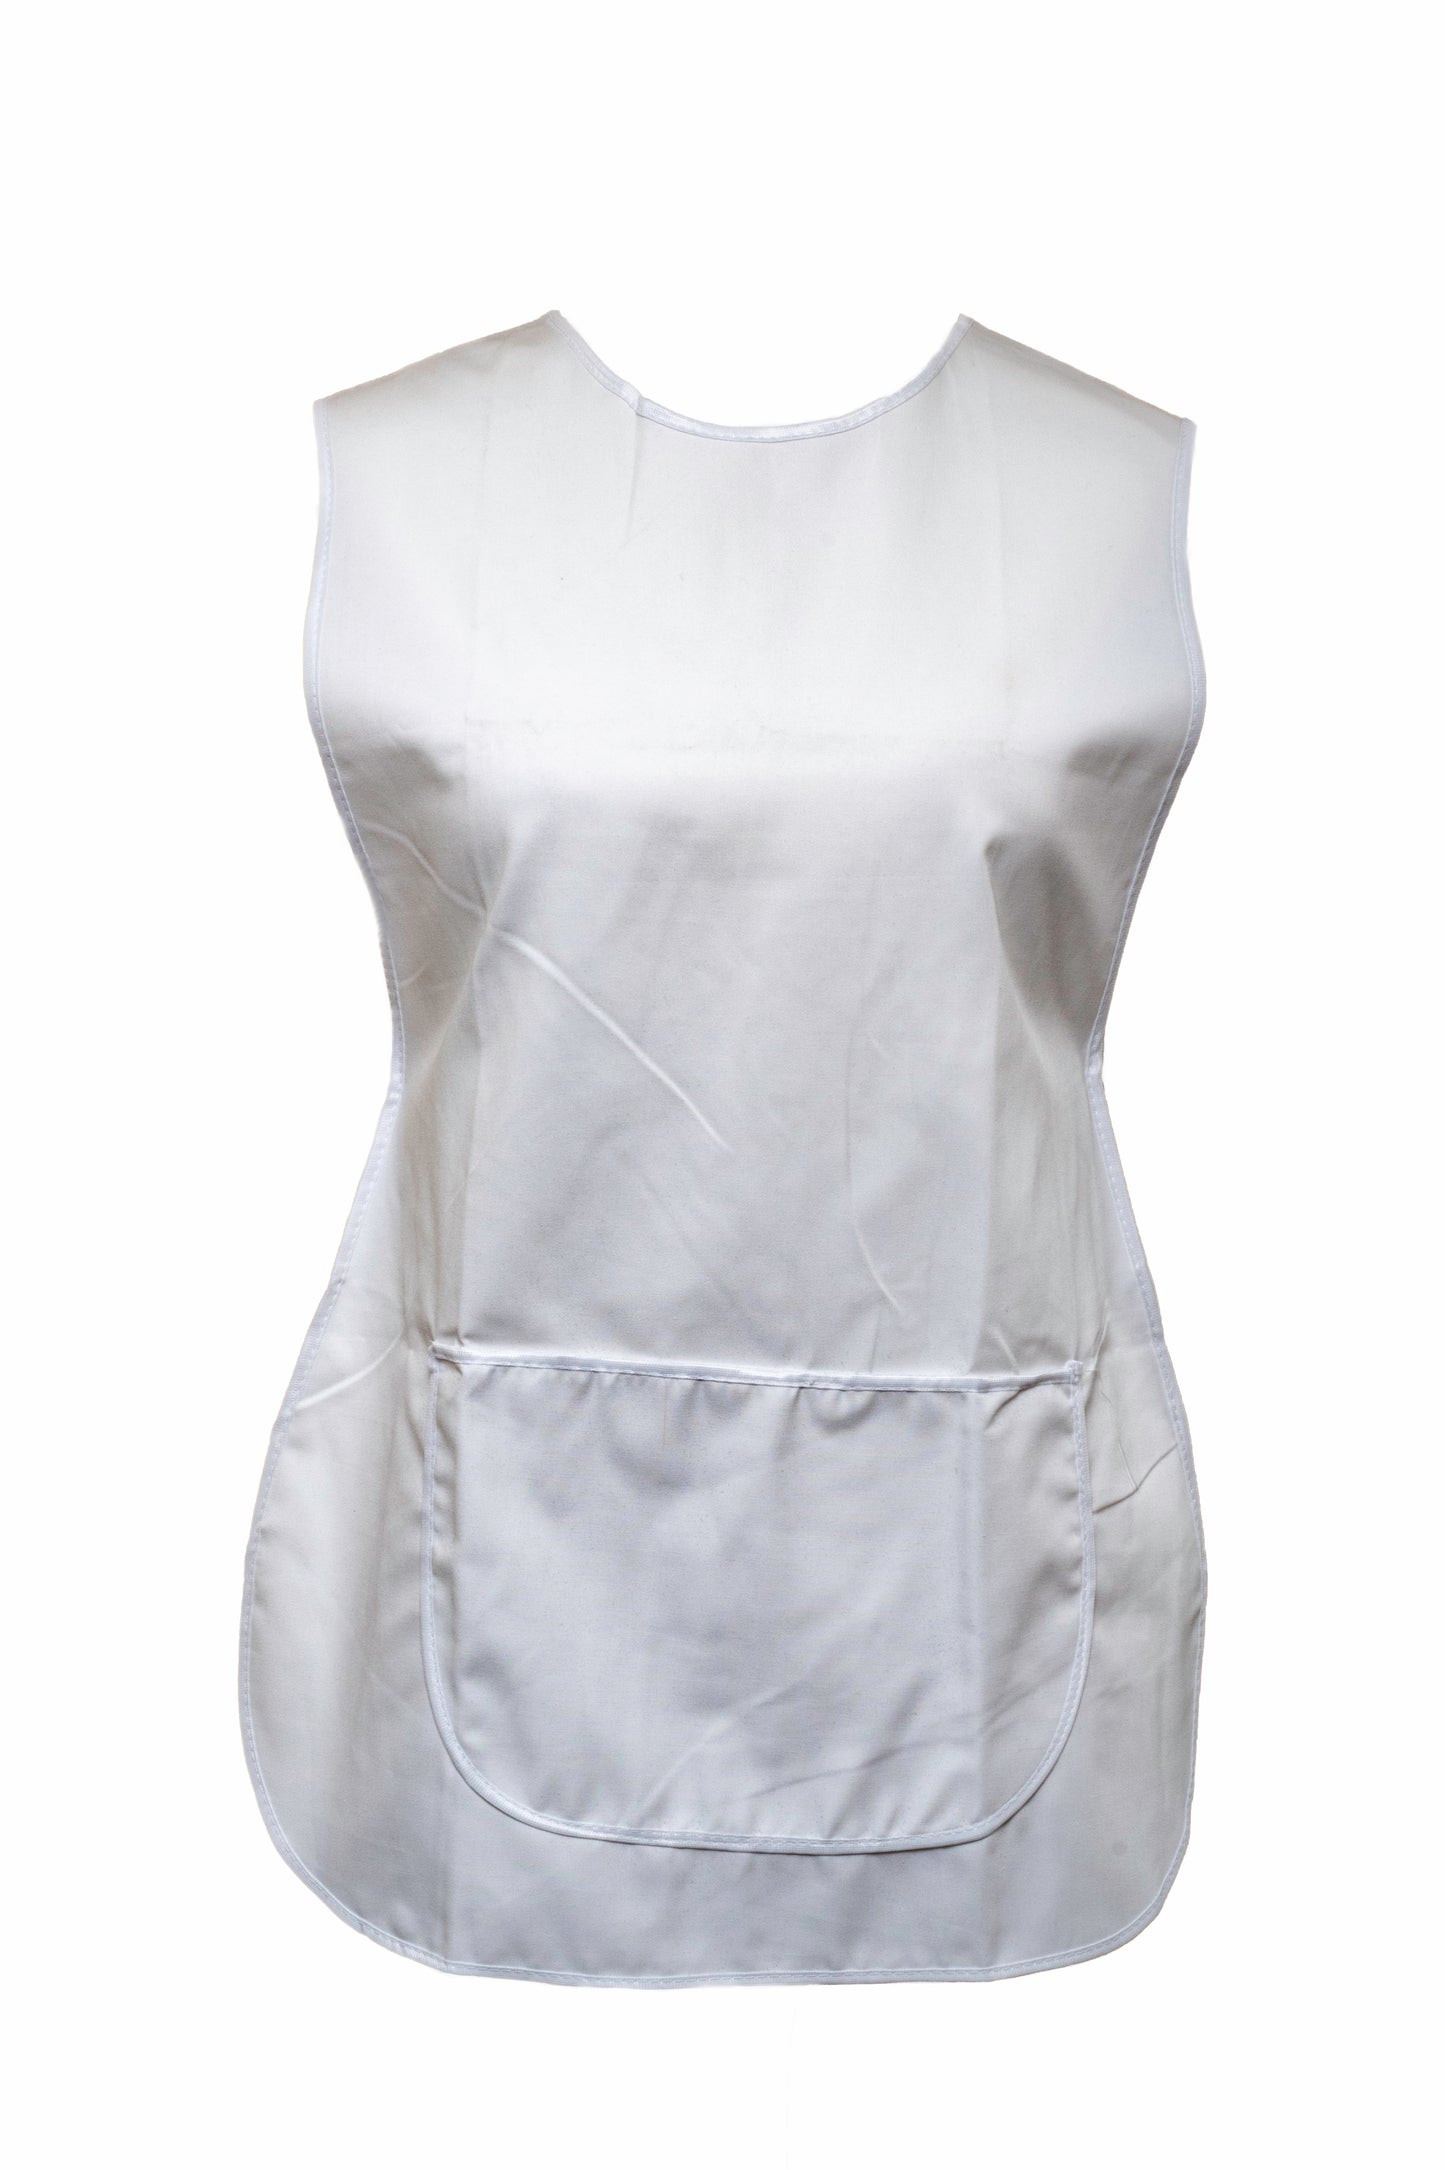 Tabard-Button Side-Over the Head-Plain-Large Front Pocket-White